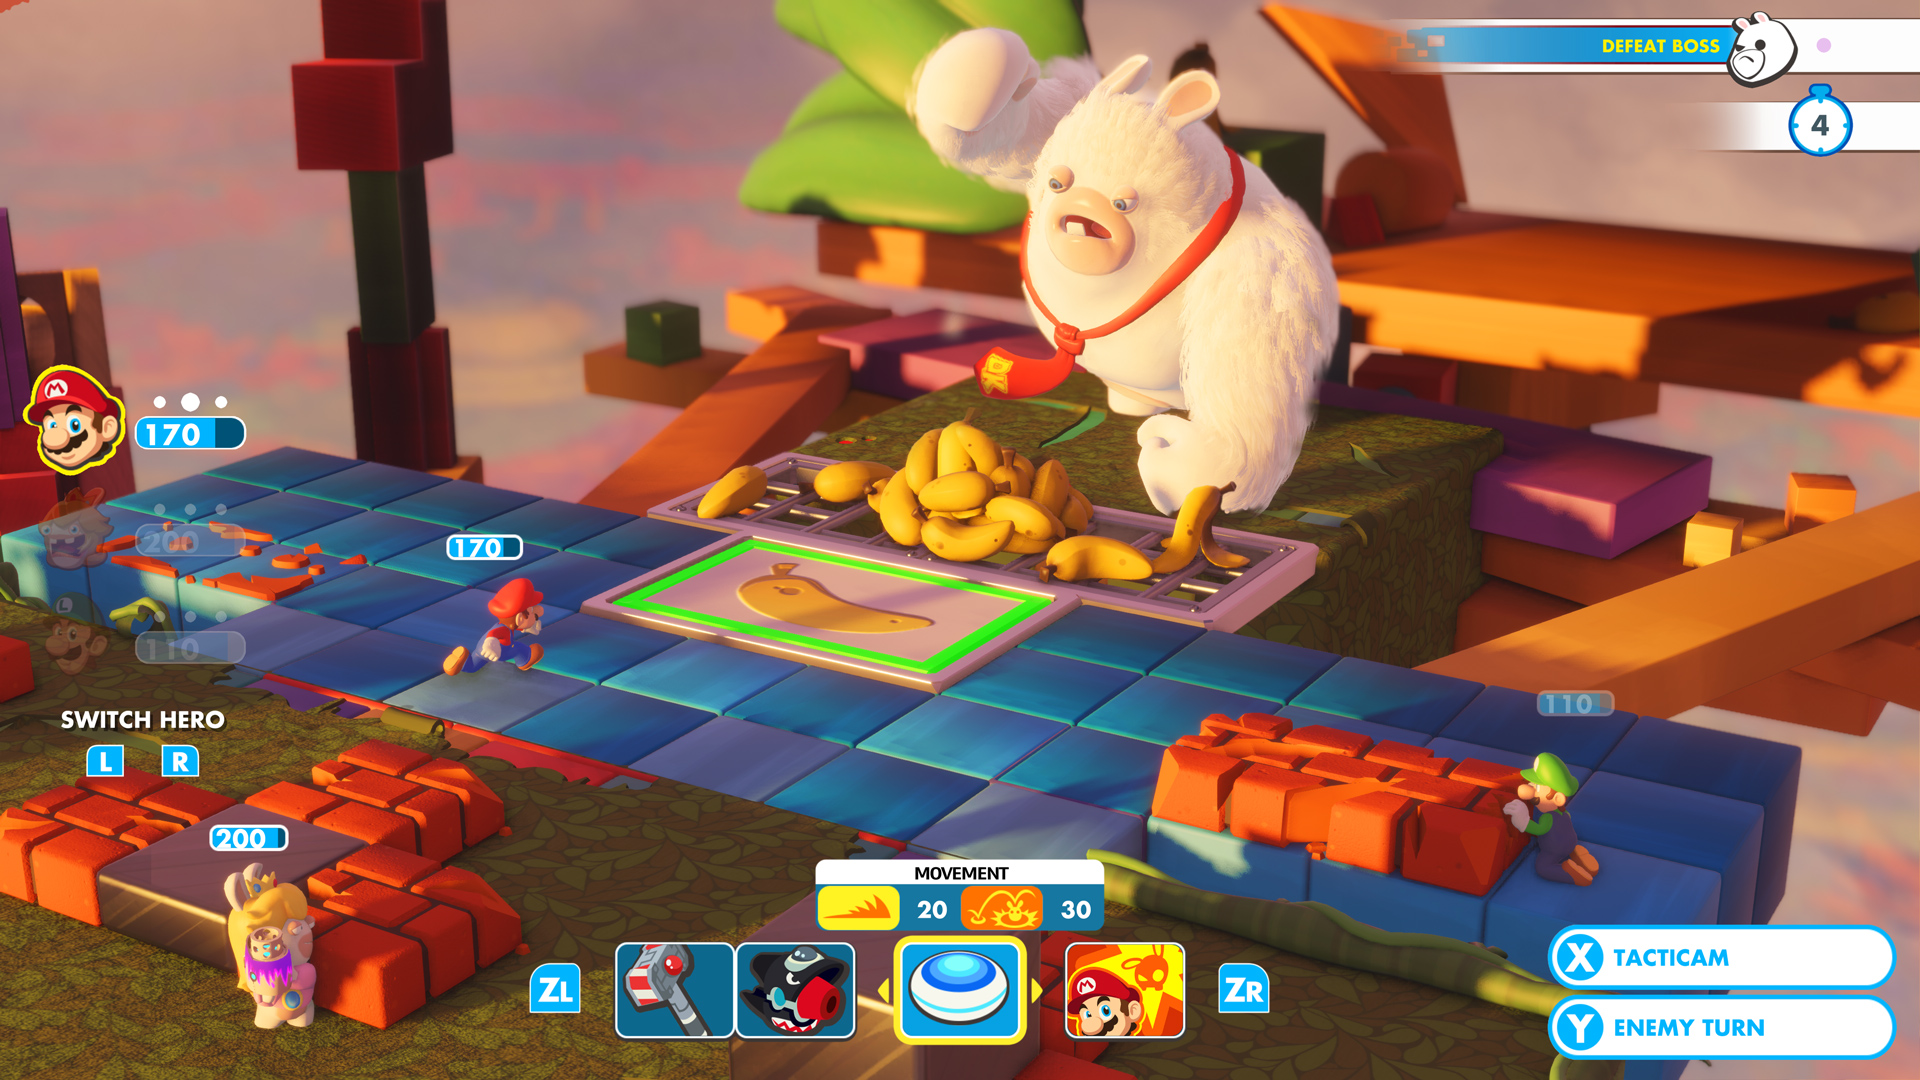 mario and rabbids online multiplayer